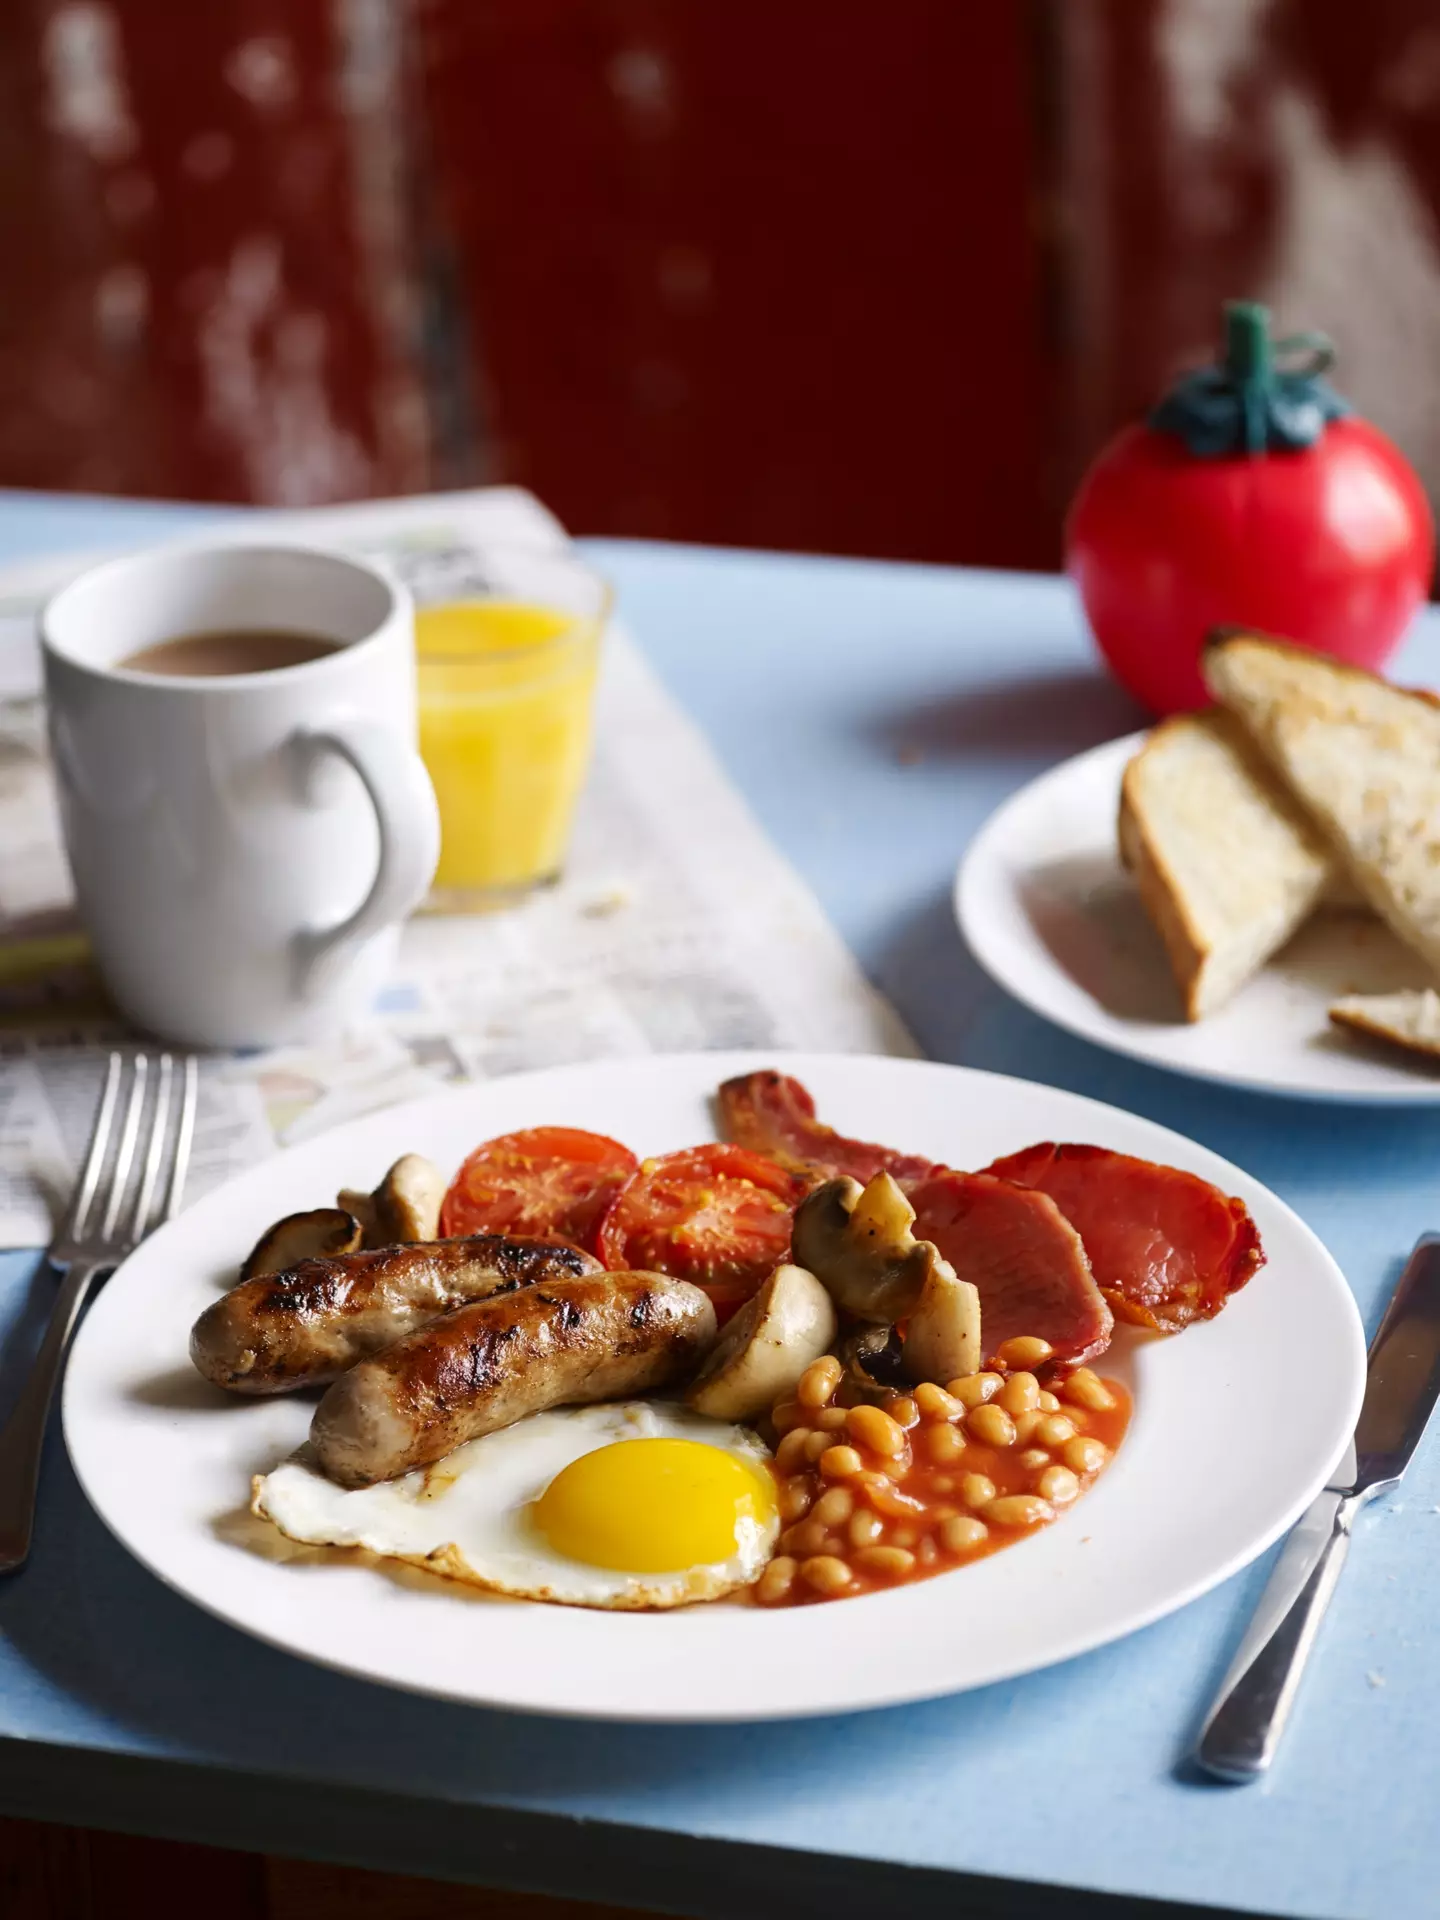 A fry up probably won't help.